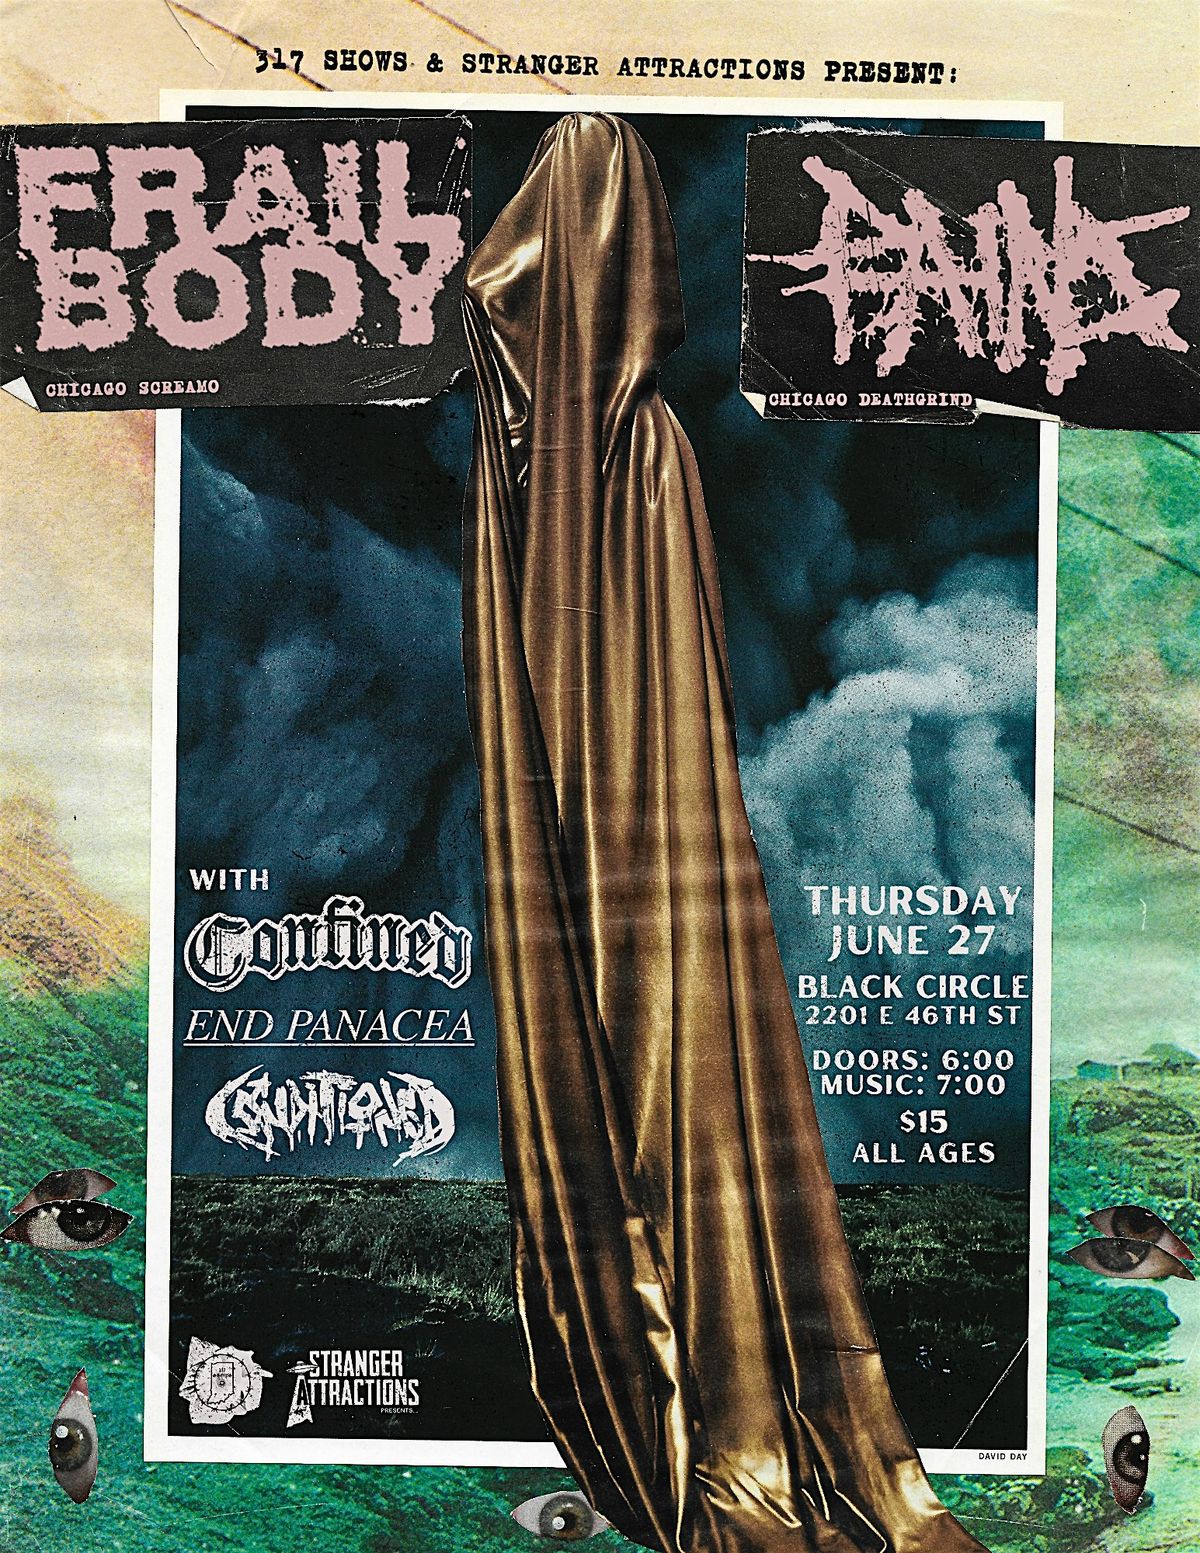 Stranger Attractions & 317 Shows Presents FRAIL BODY w\/ PAINS and more!!